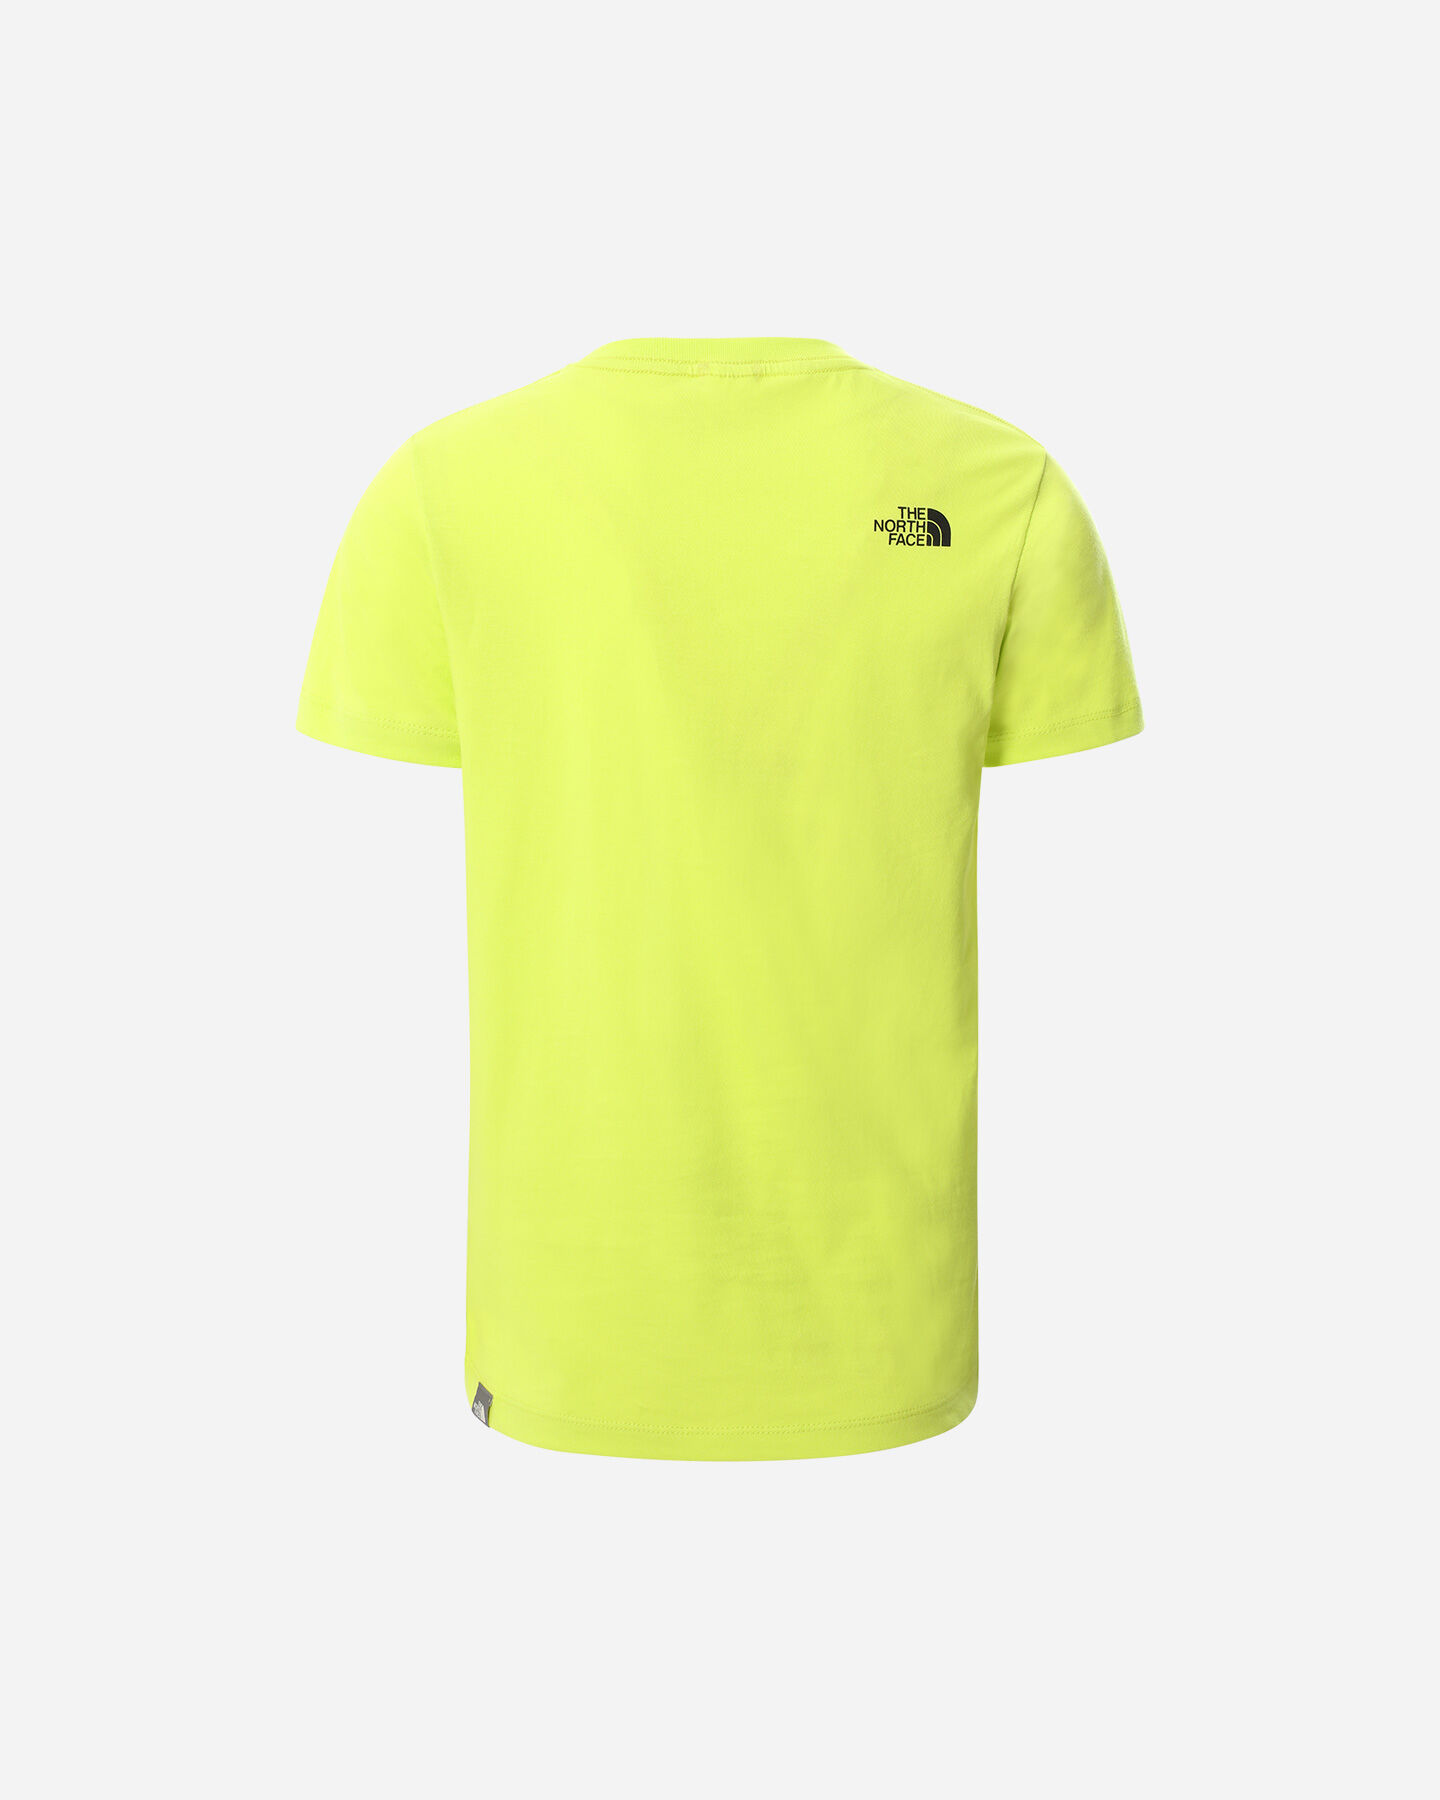  T-Shirt THE NORTH FACE SIMPLE DOME  JR S5314154|JE3|S scatto 1